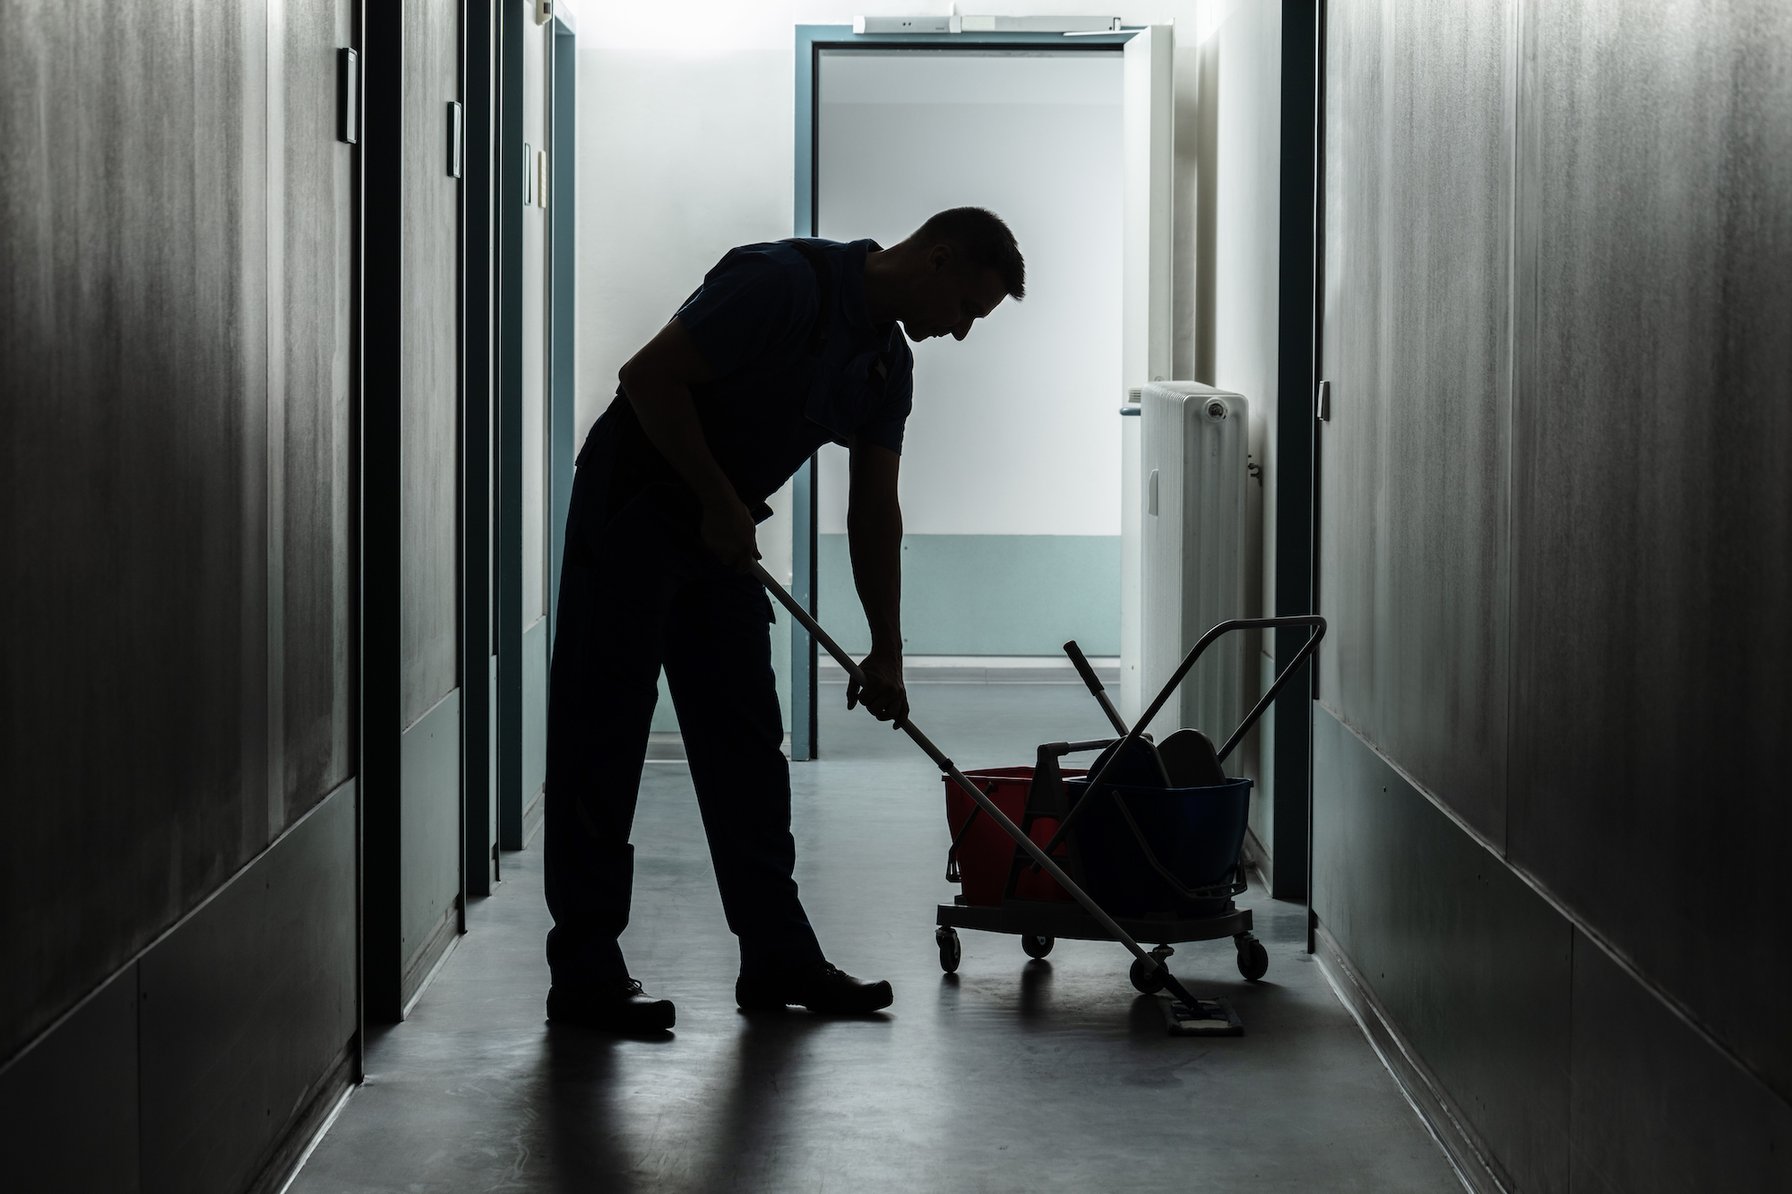 Janitorial Work Order Software can assist cleaning service business owners and facilities managers maintain quality control in a single collaborative software